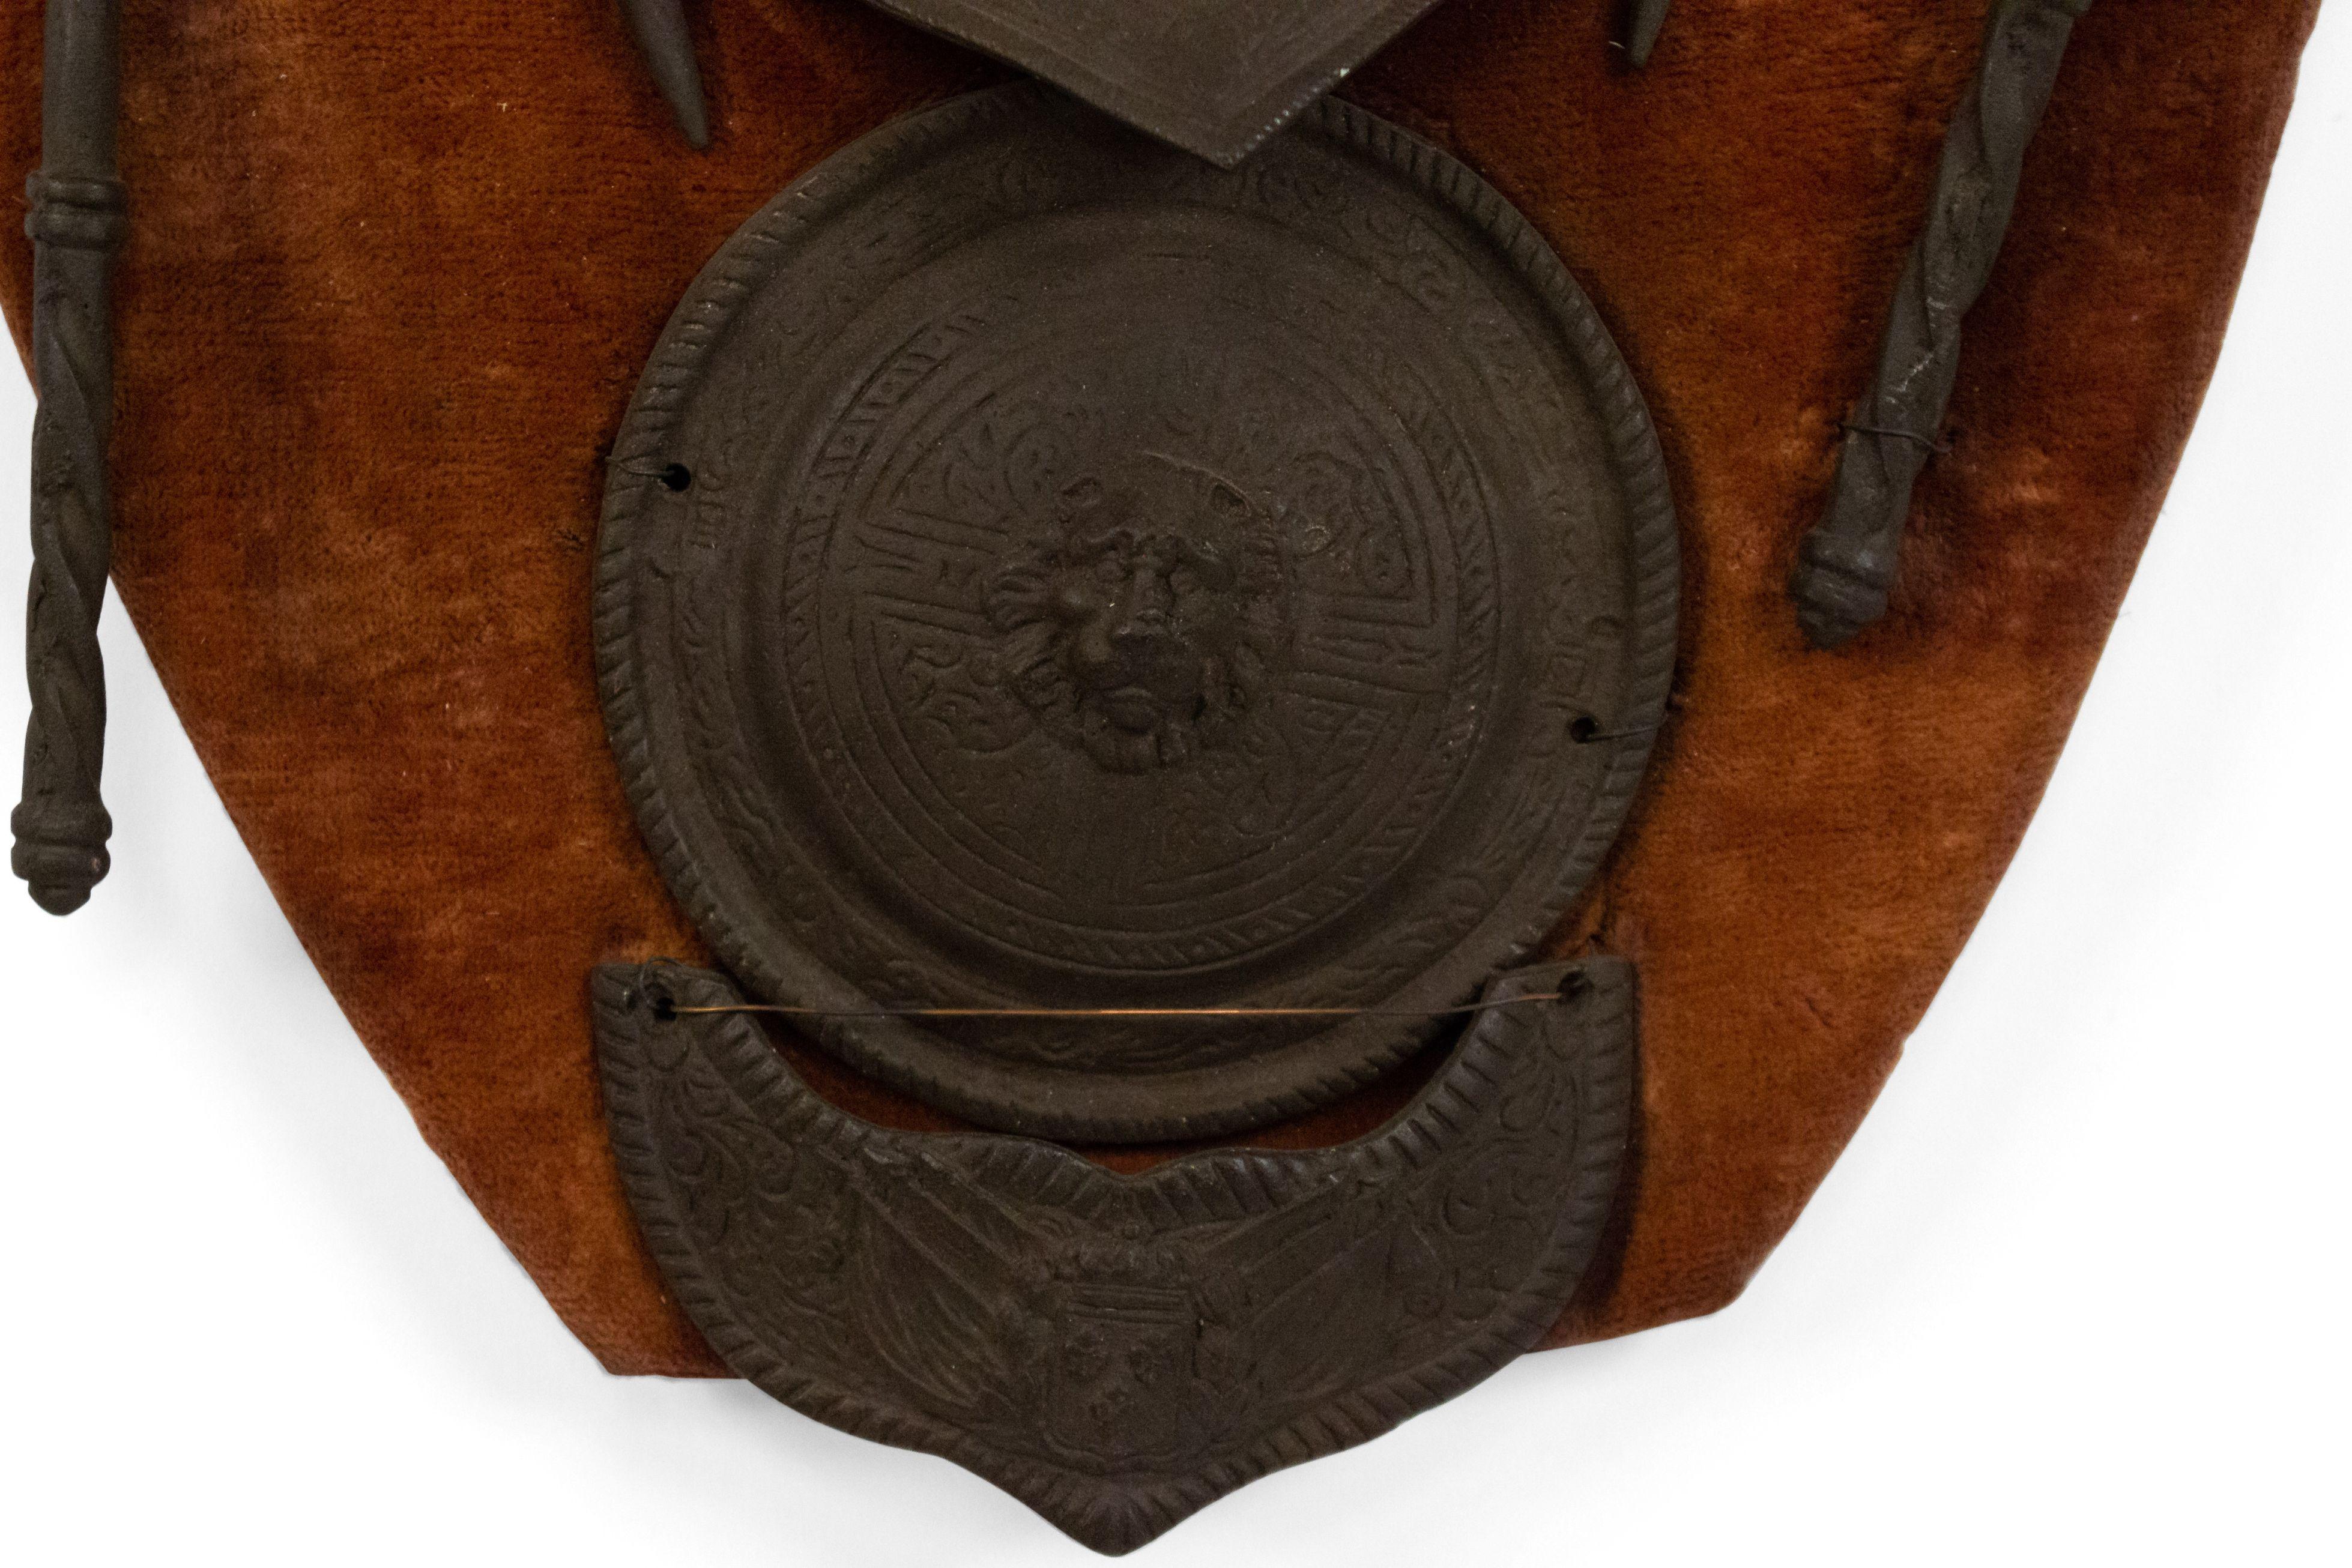 English Renaissance Style Novelty Shield In Good Condition For Sale In New York, NY